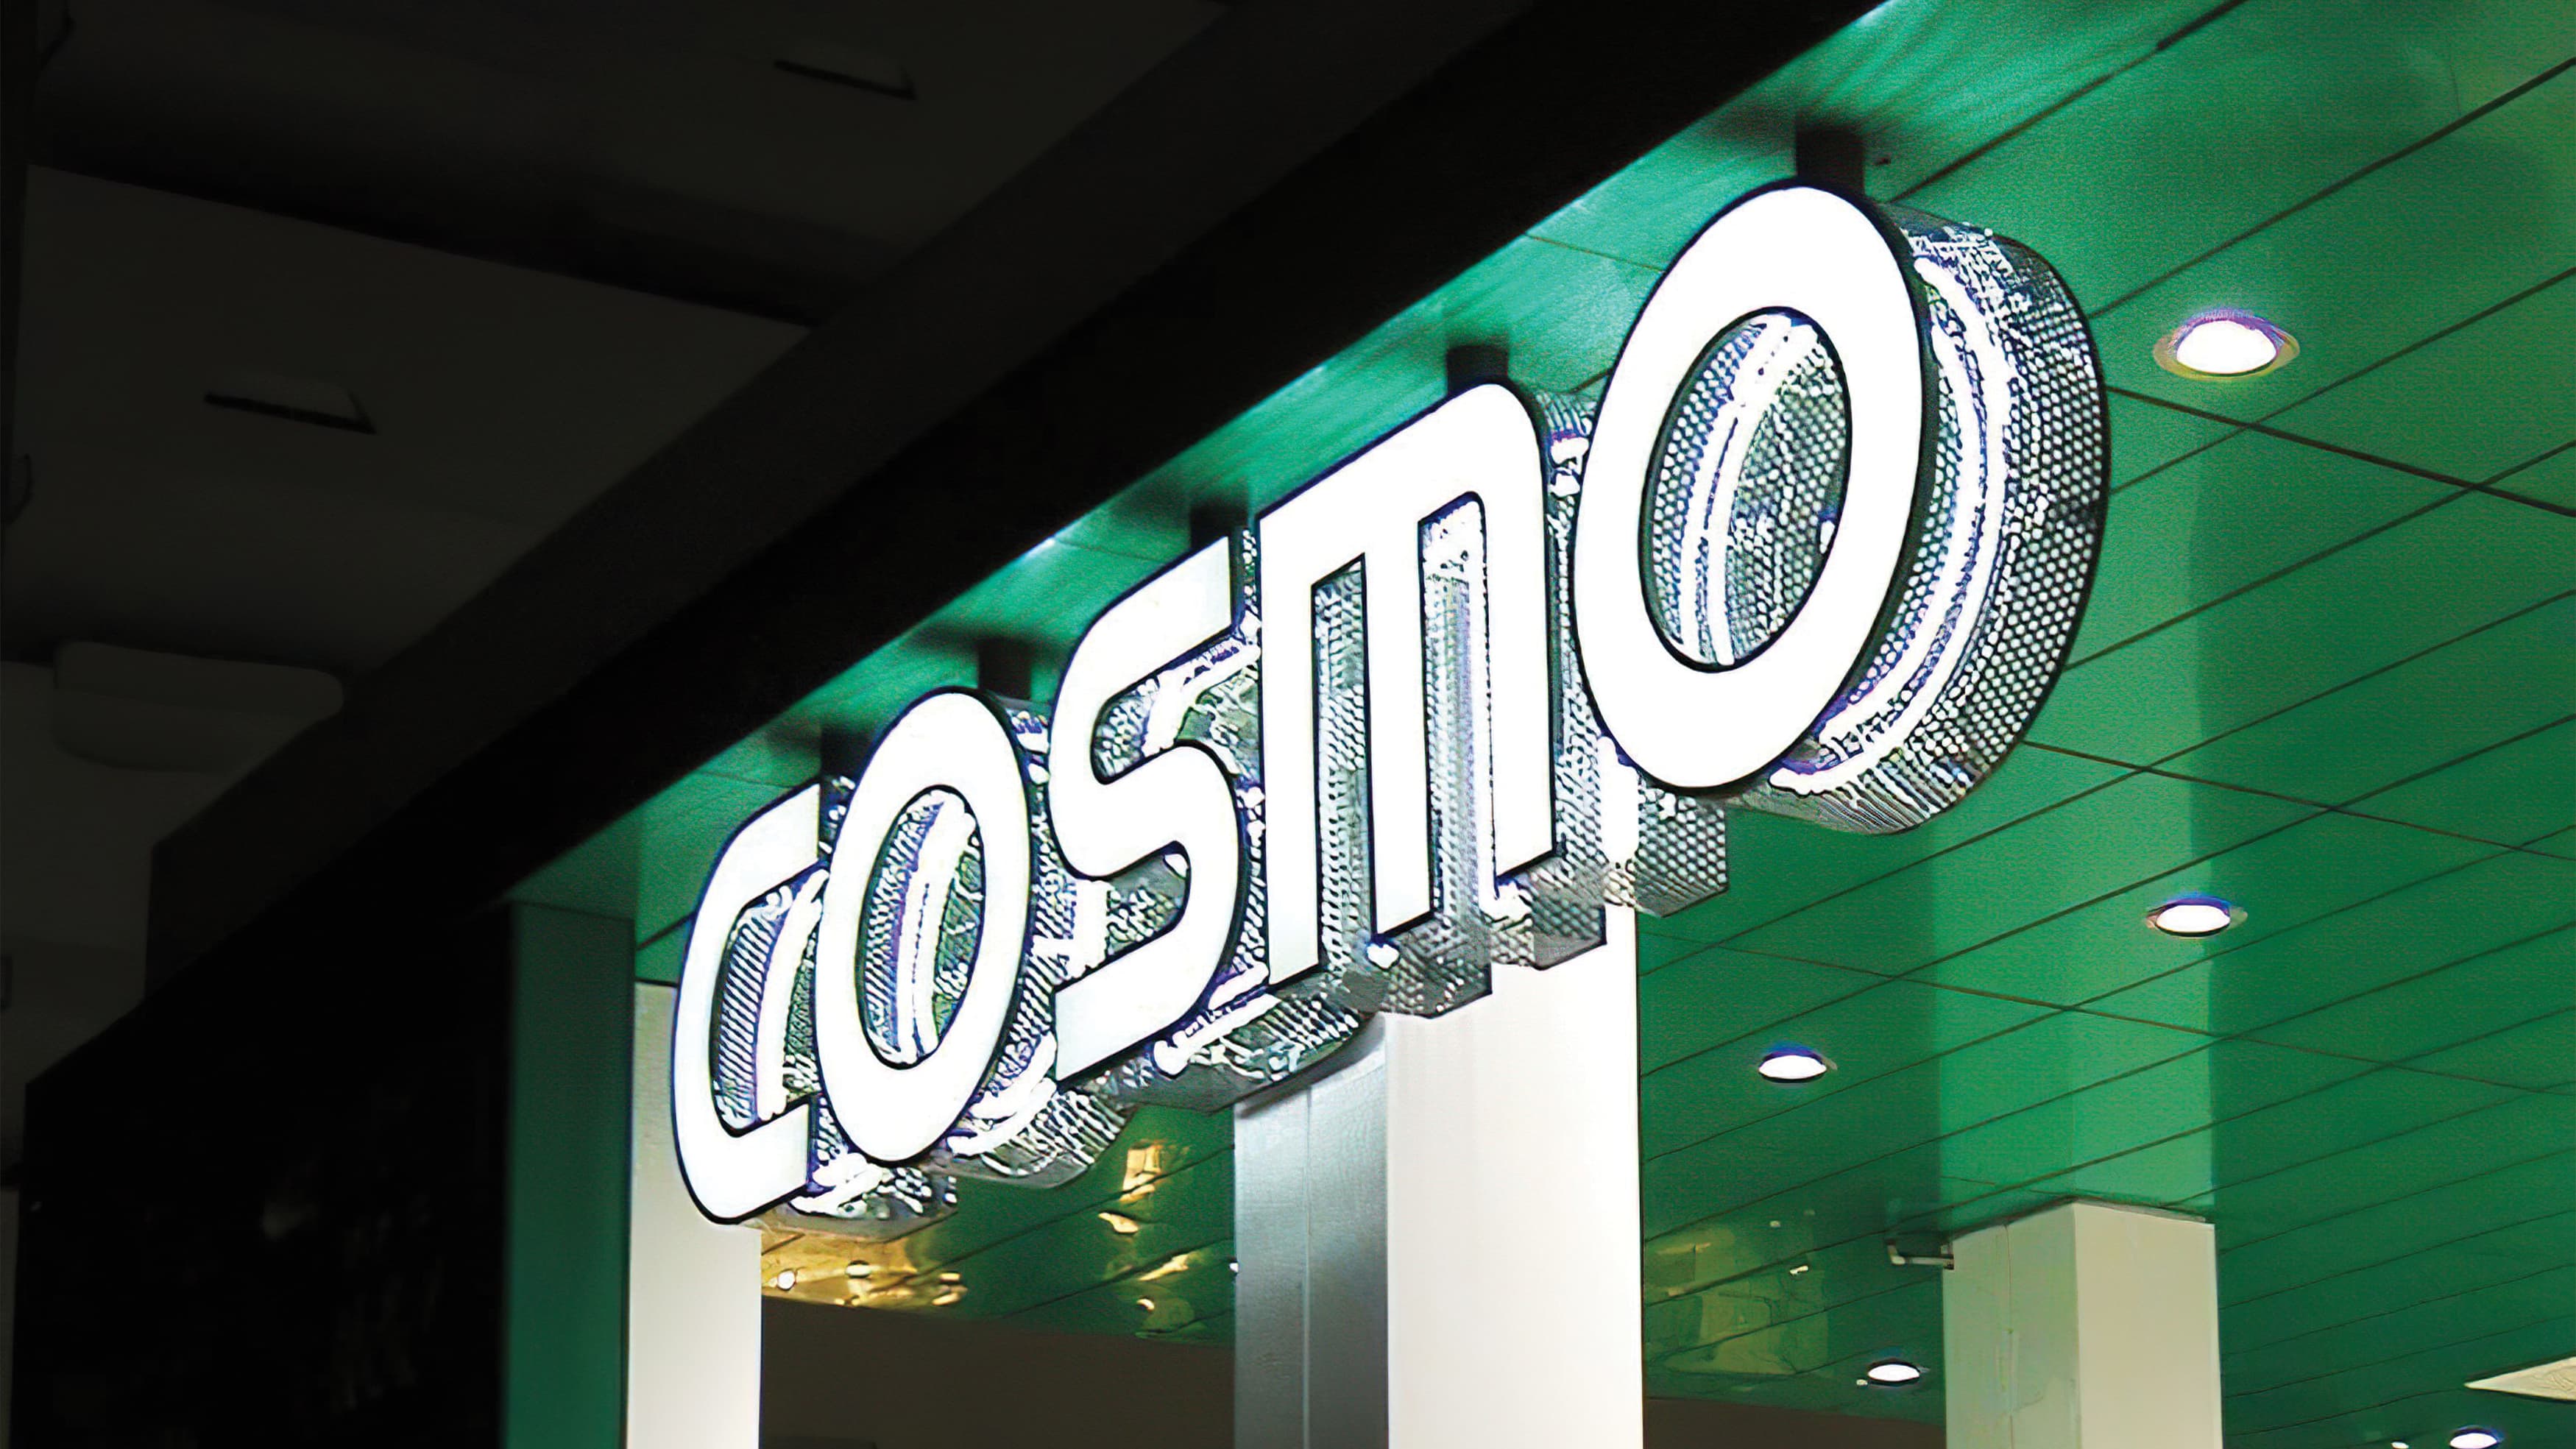 Cosmo perforated signage with internal illumination in white with green background